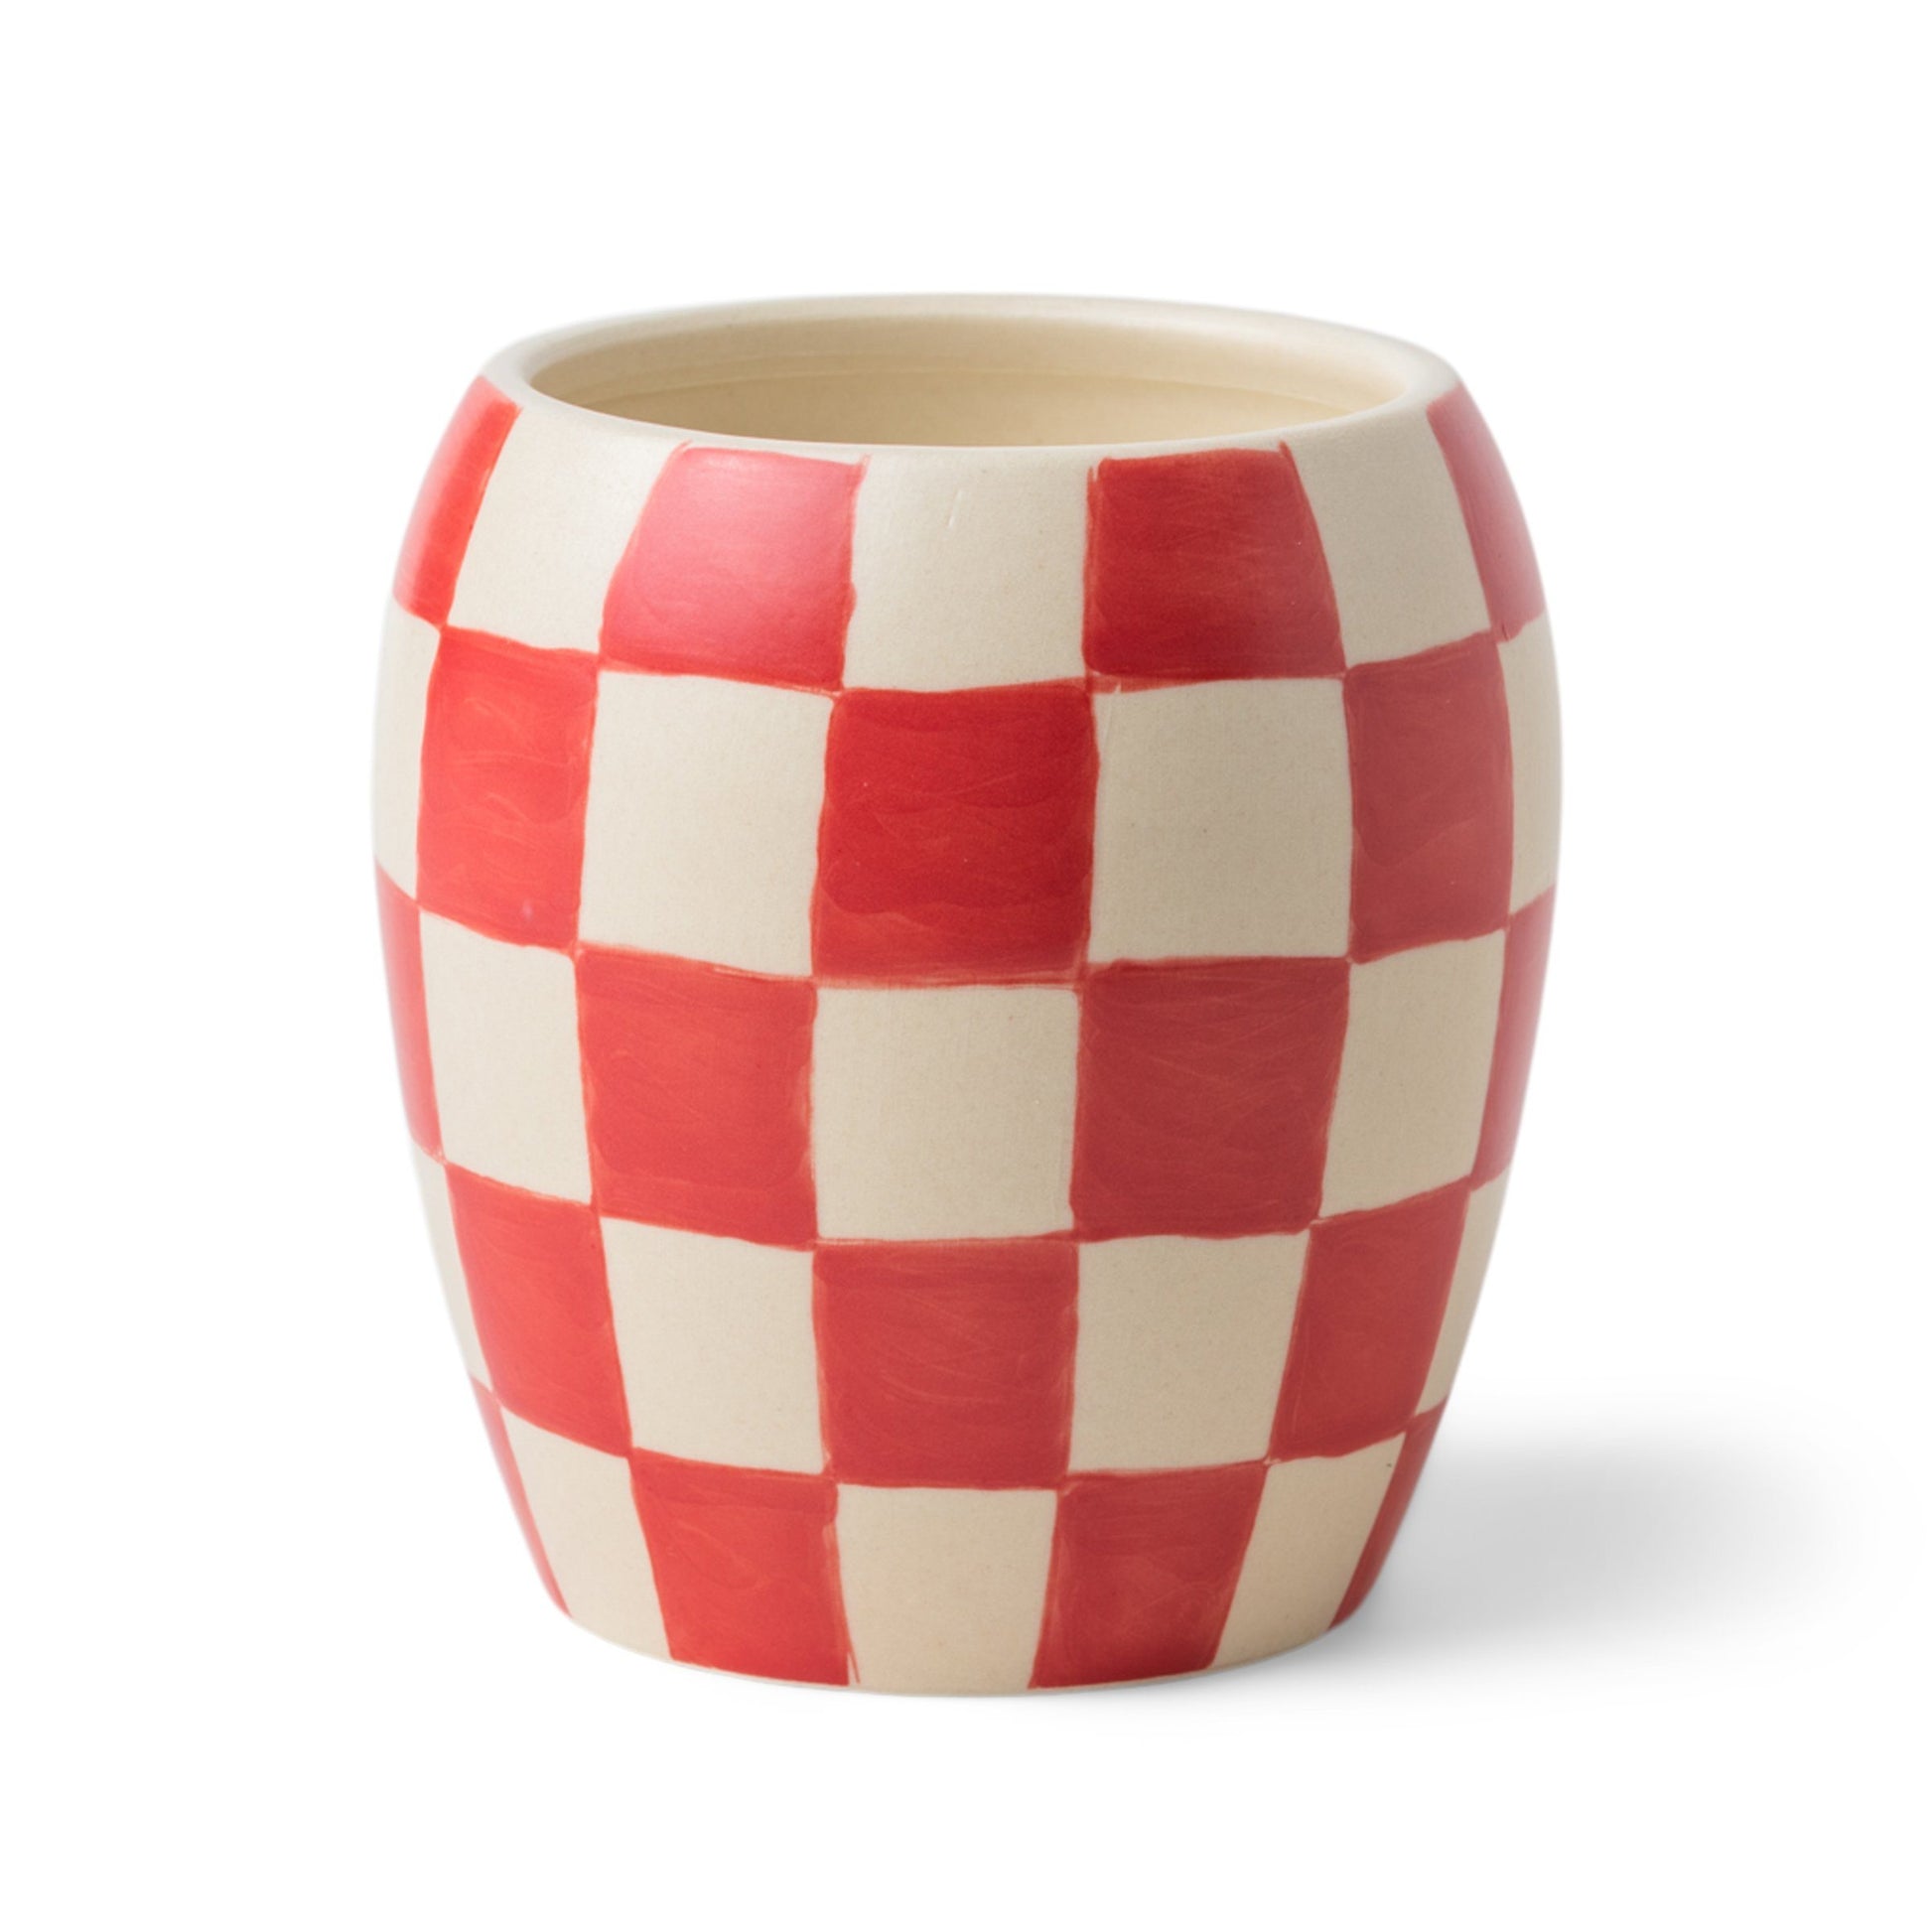 11 oz ceramic vessel with rounded cylindrical shape and a red and white checker design; one cotton wick